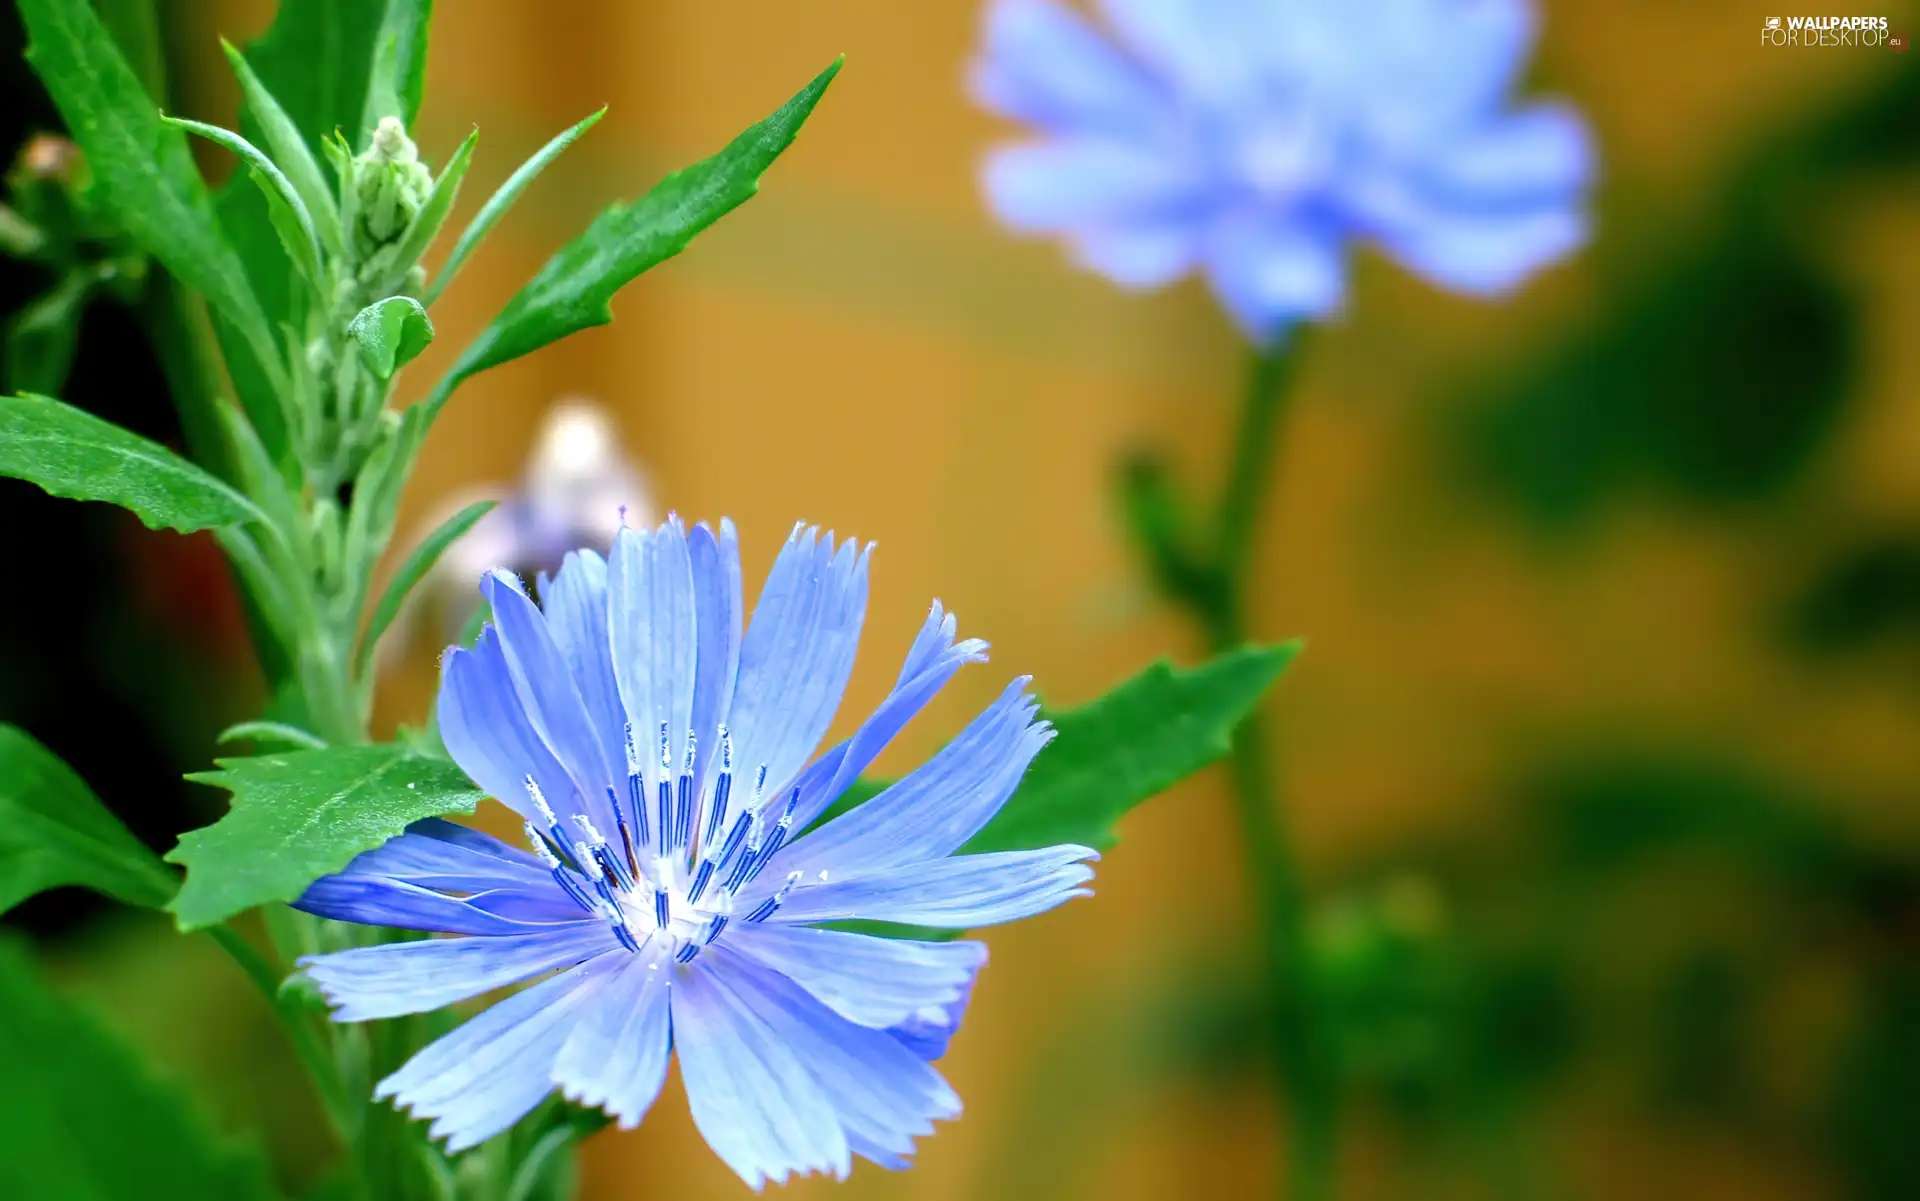 Blue, Colourfull Flowers, field, chicory